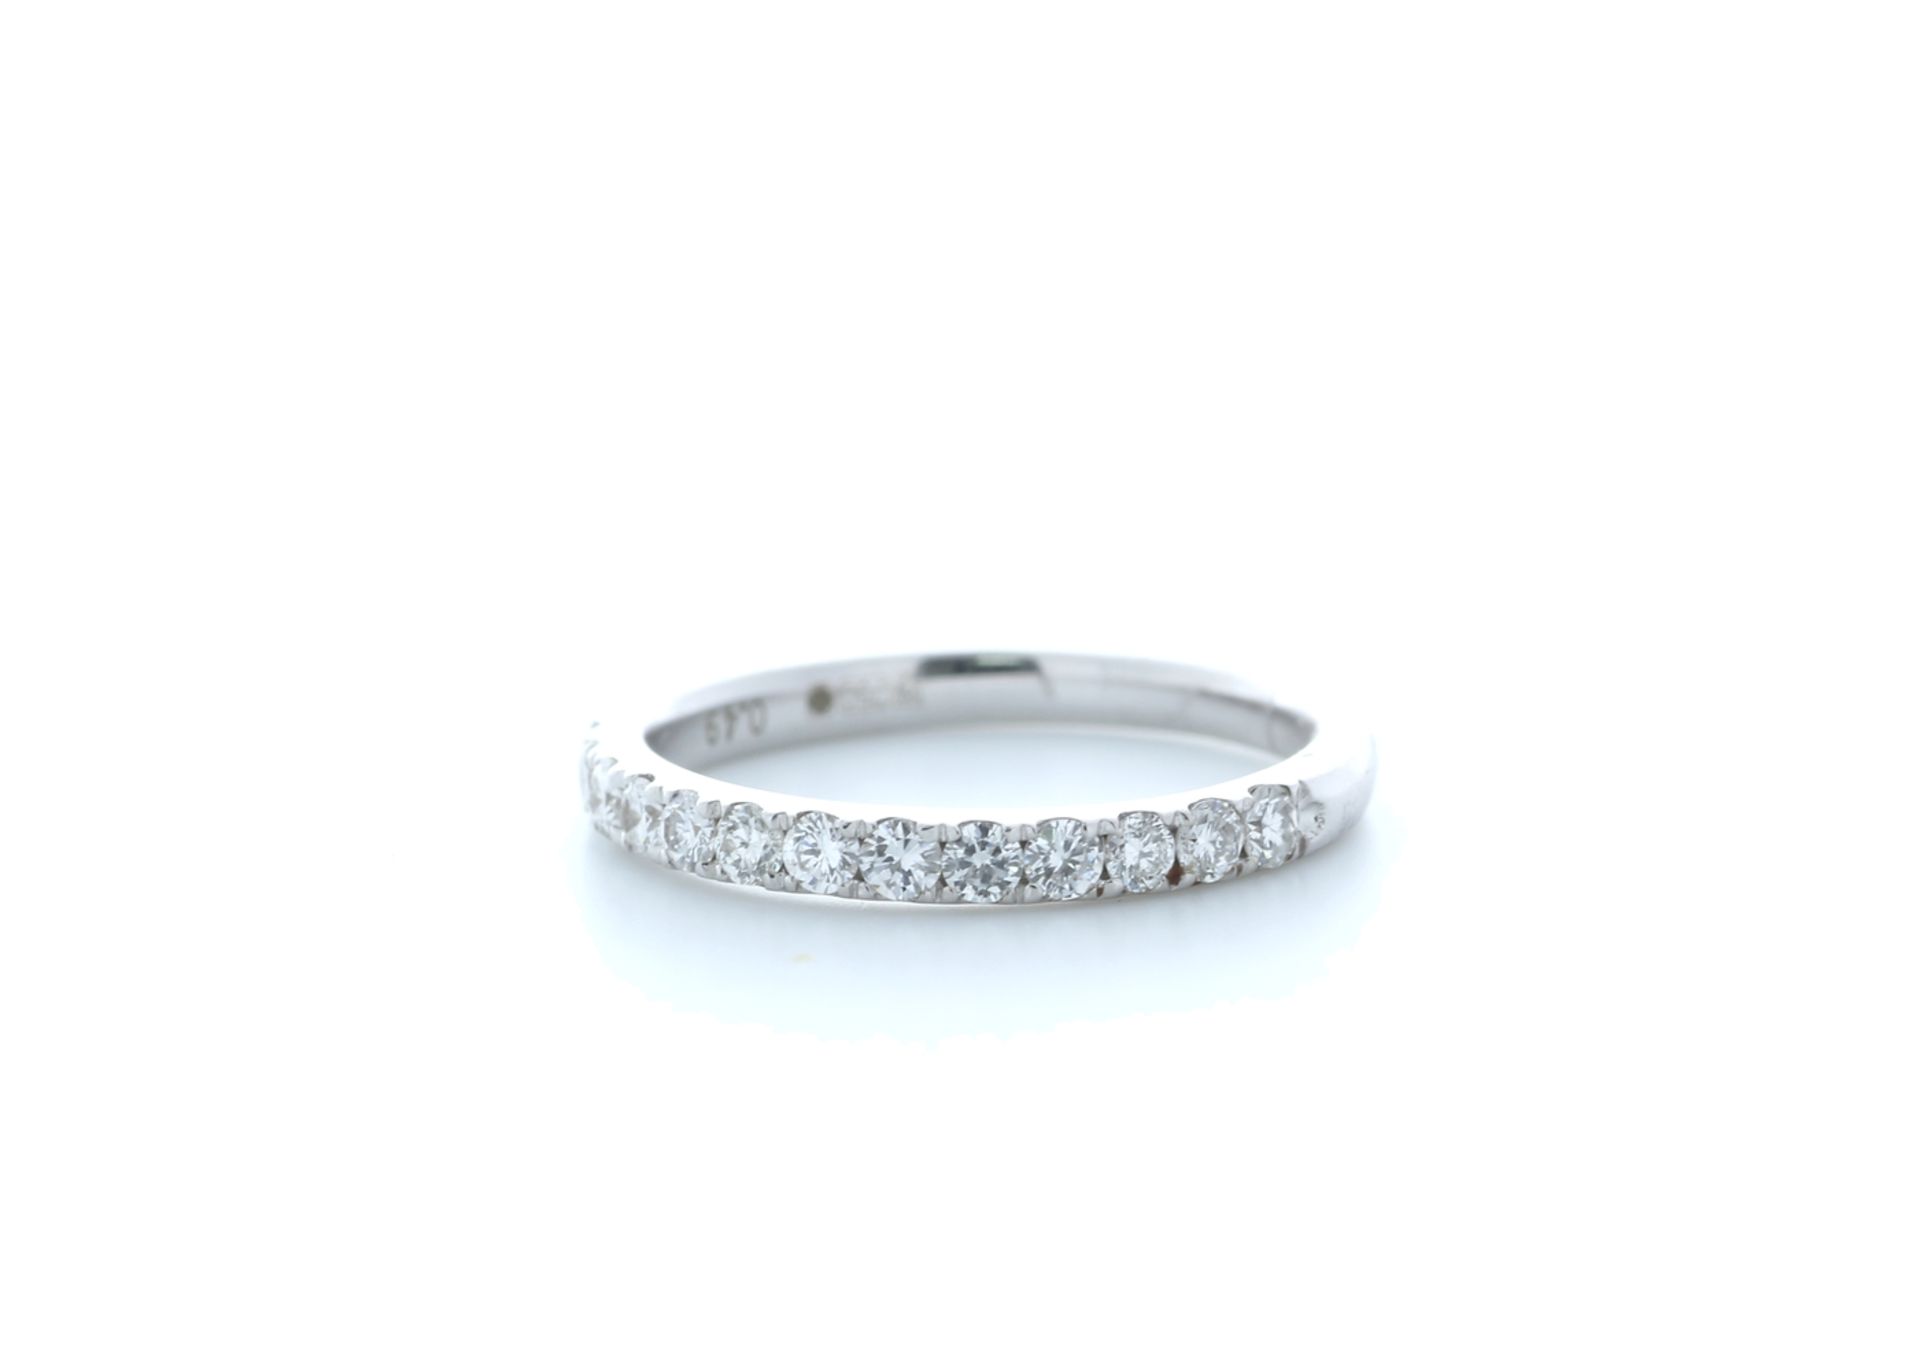 18ct White Gold Claw Set Semi Eternity Diamond Ring 0.17 Carats - Valued by IDI £2,250.00 - 18ct - Image 2 of 4